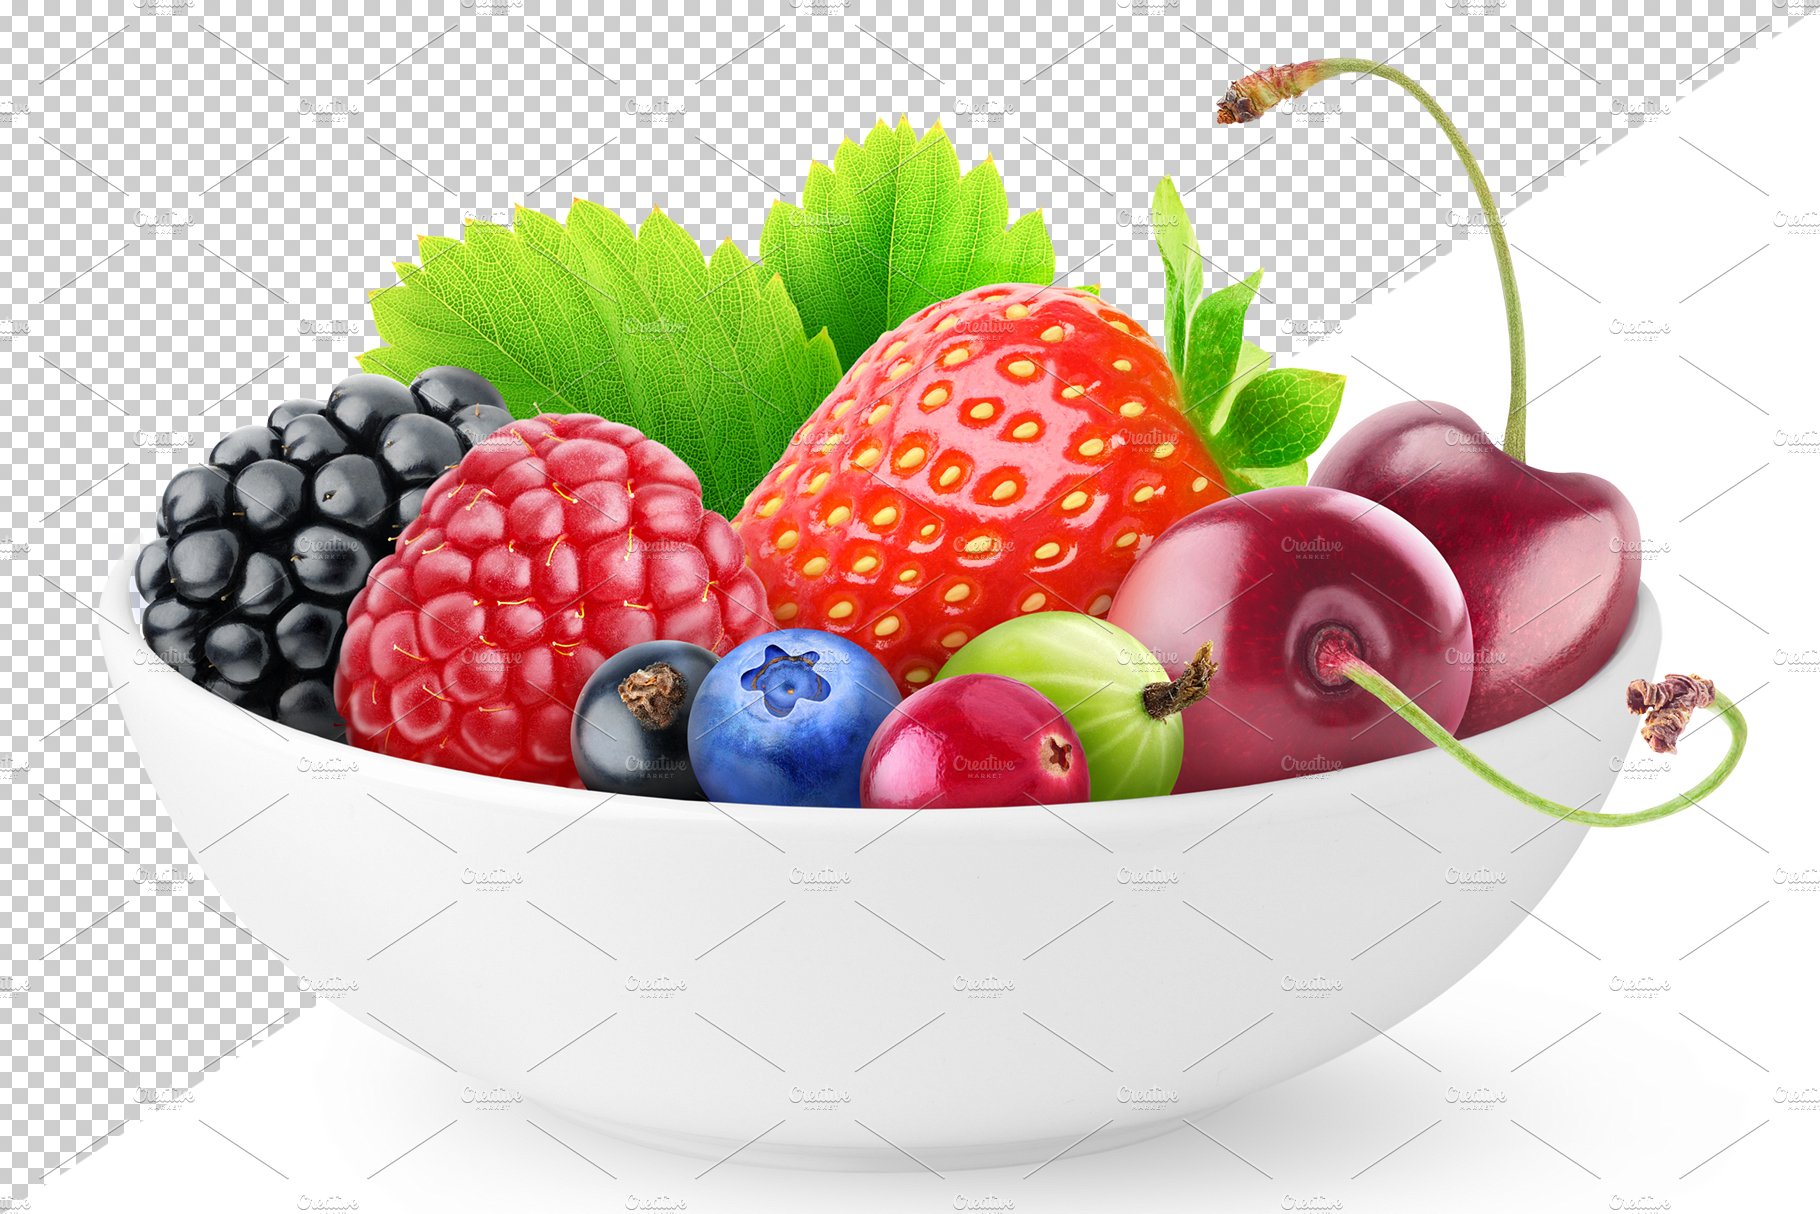 Pile of berries preview image.